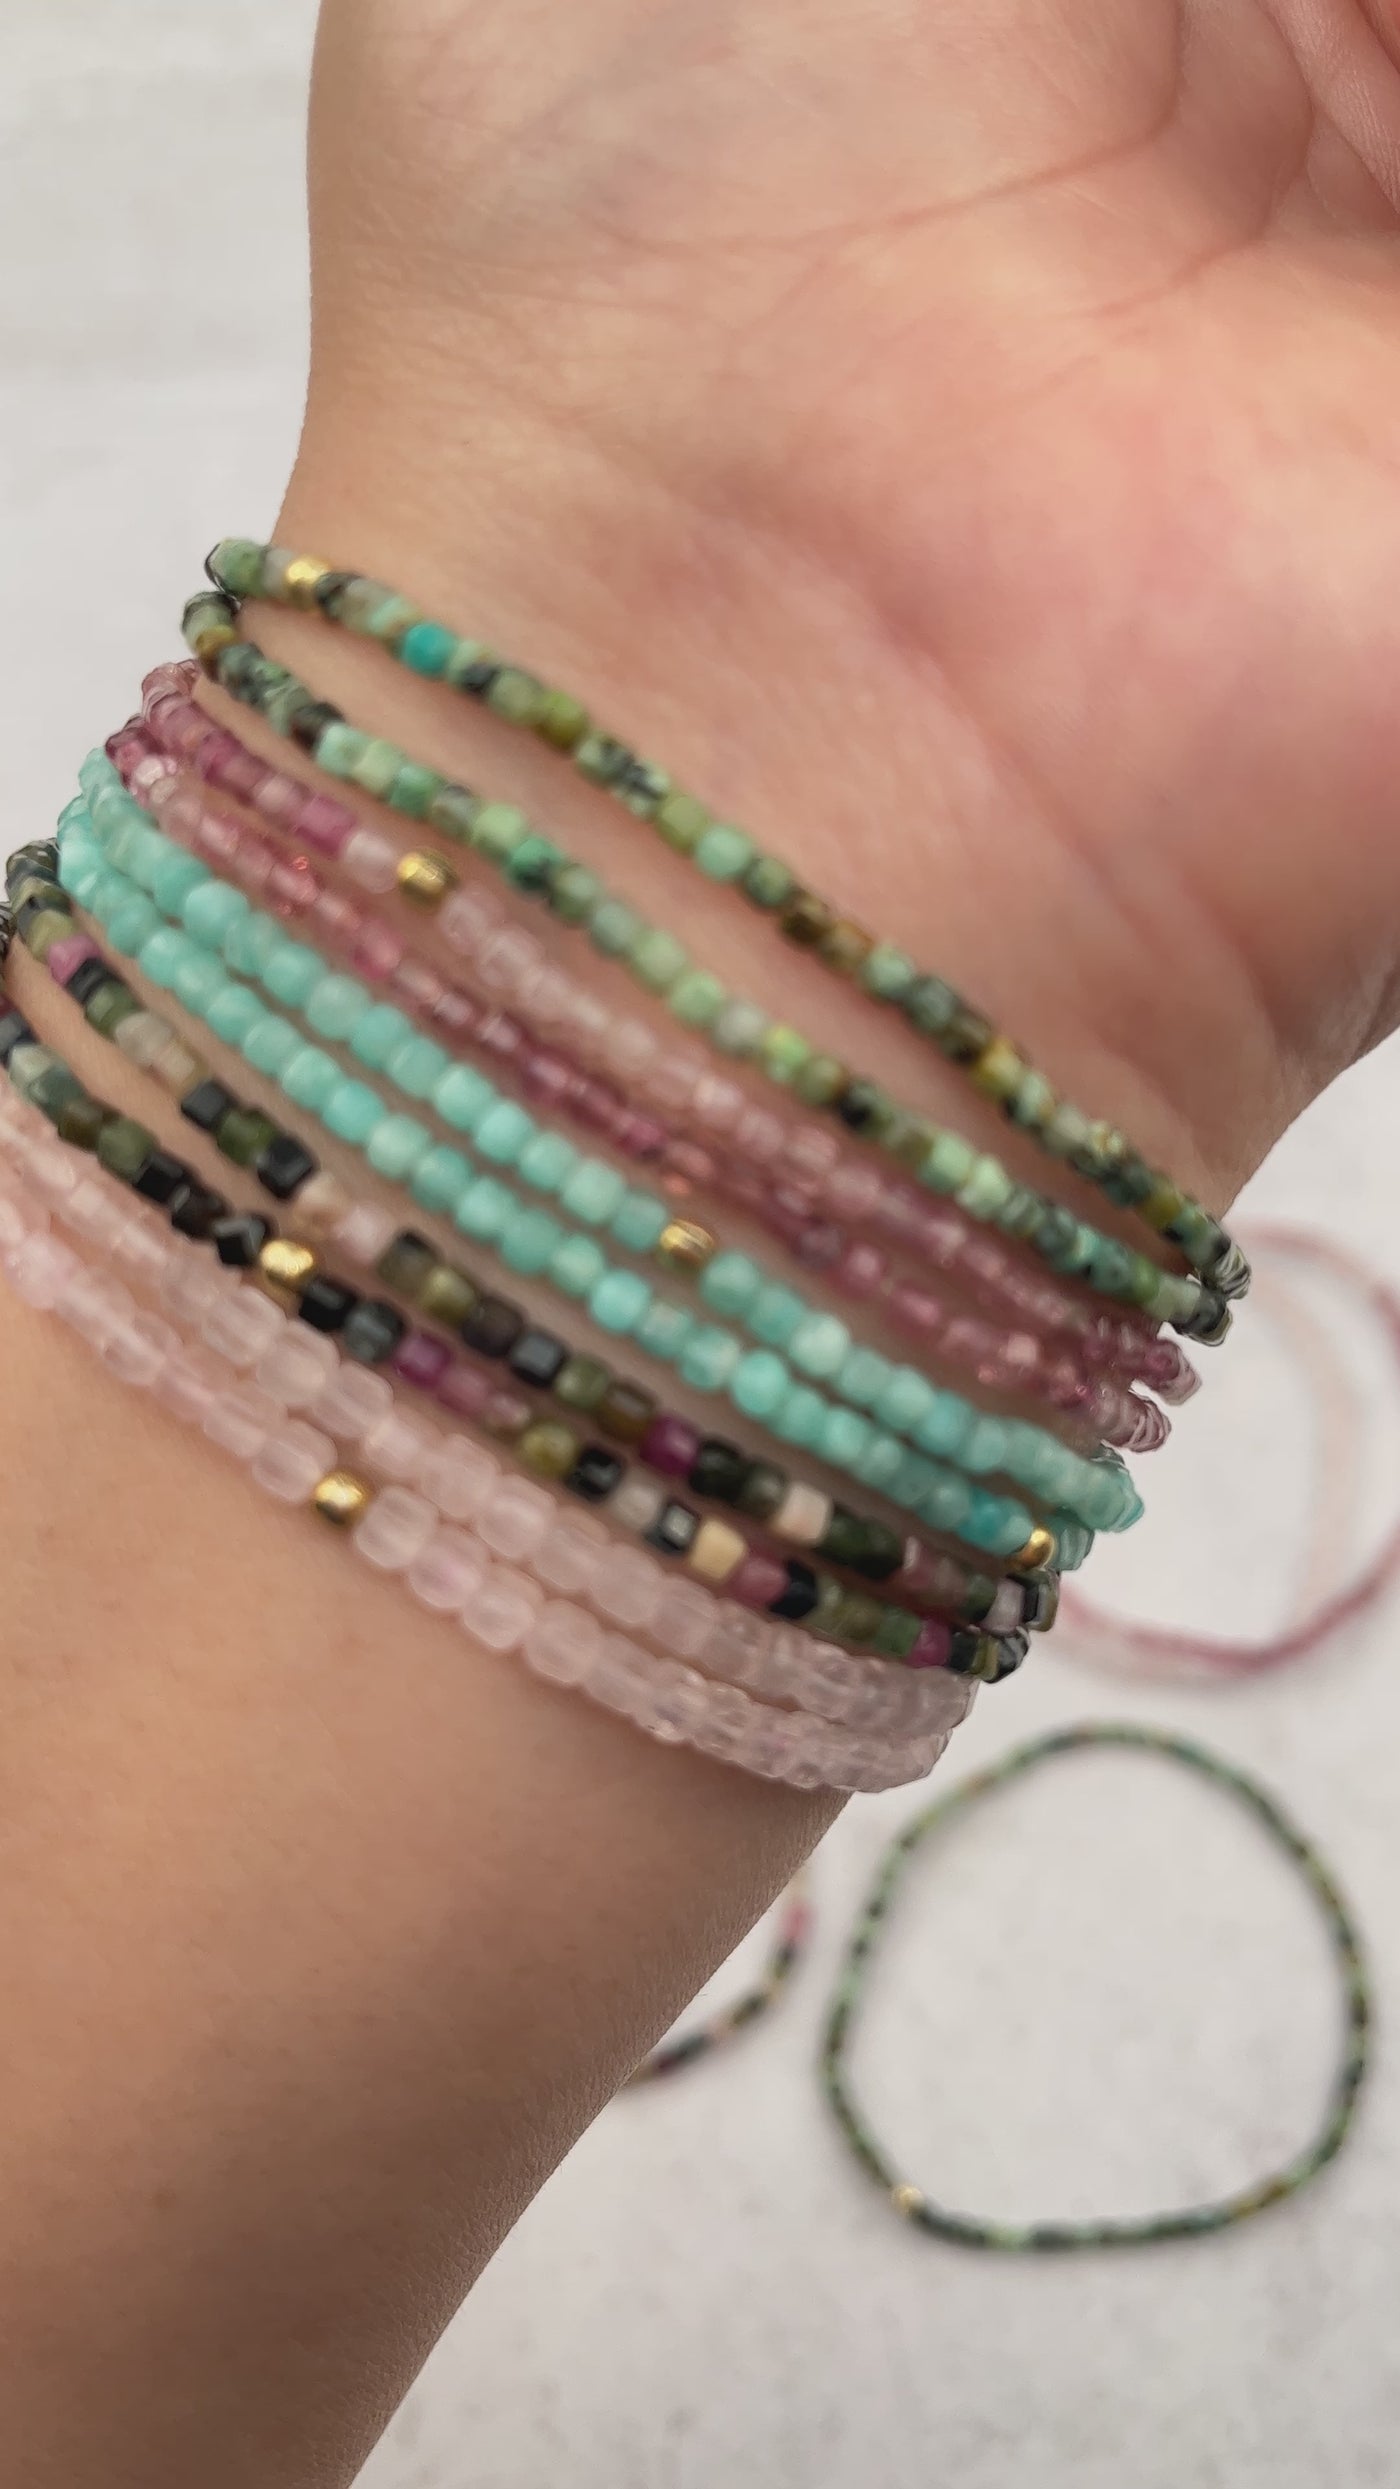 Gemstone Bracelets - 2.5mm - Faceted Cube High Quality